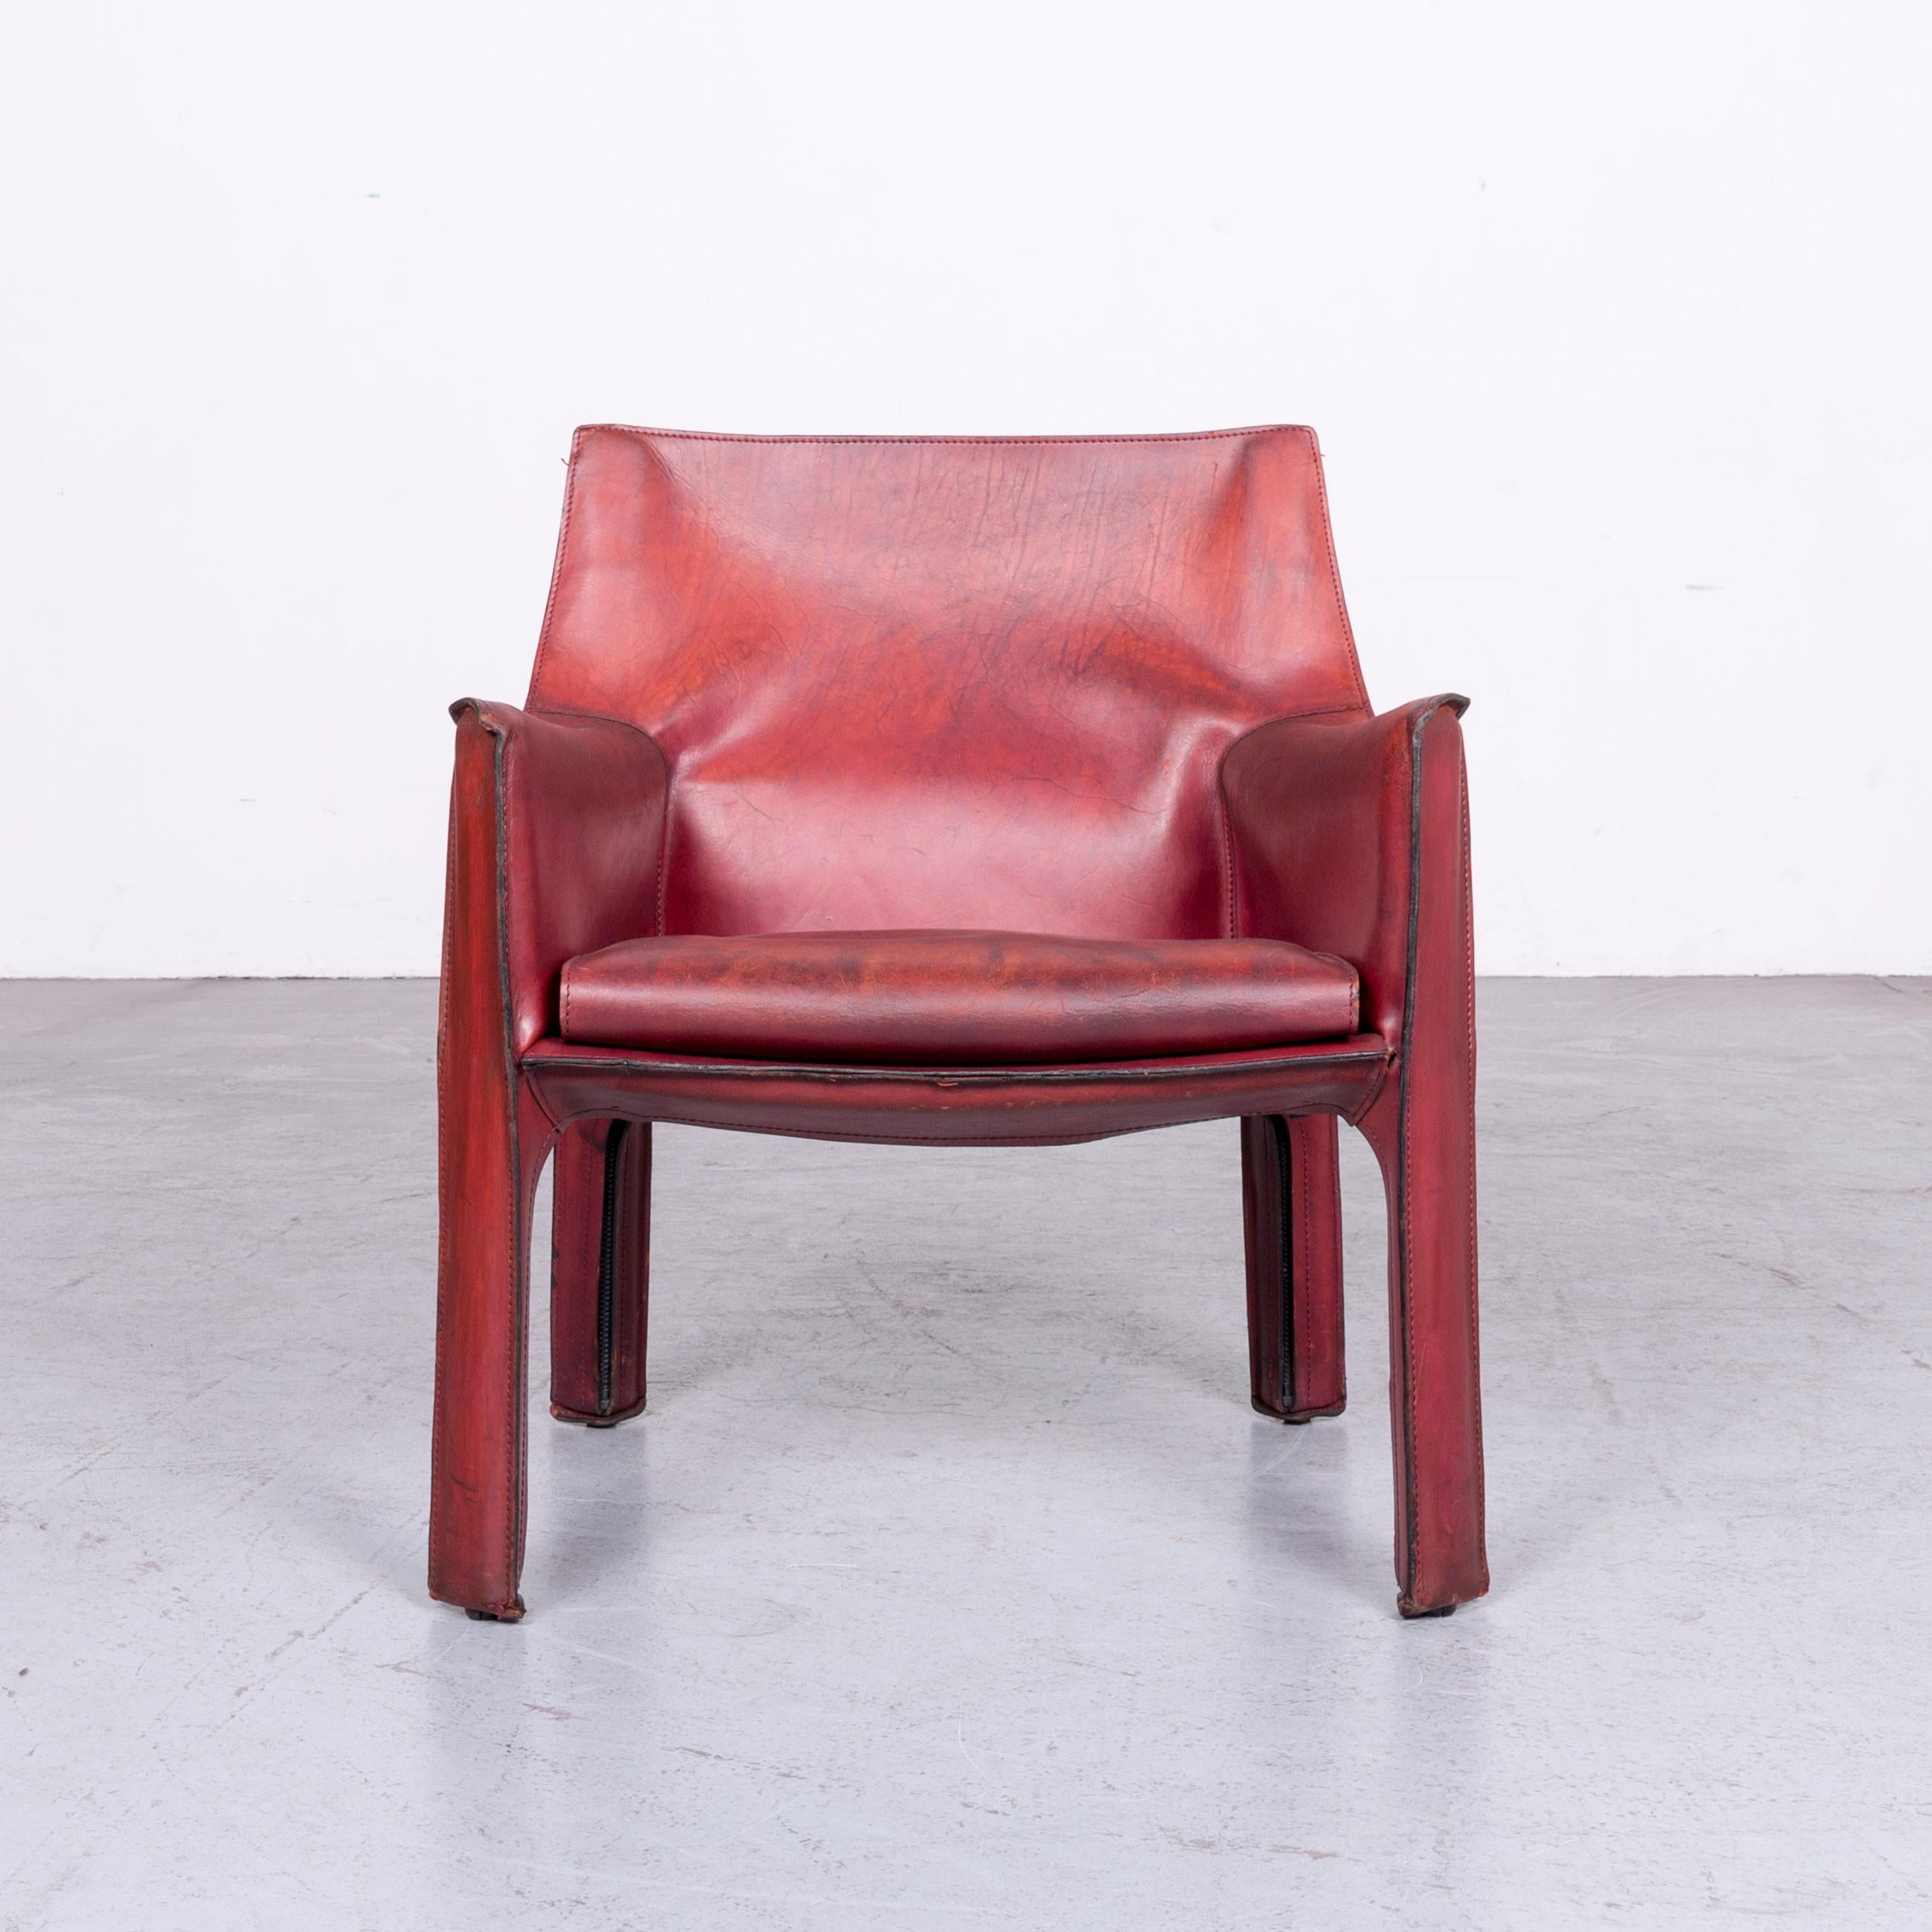 Bauhaus Cassina Cab 414 Vintage Leather Armchair Set Red by Mario Belinni 1970-1979